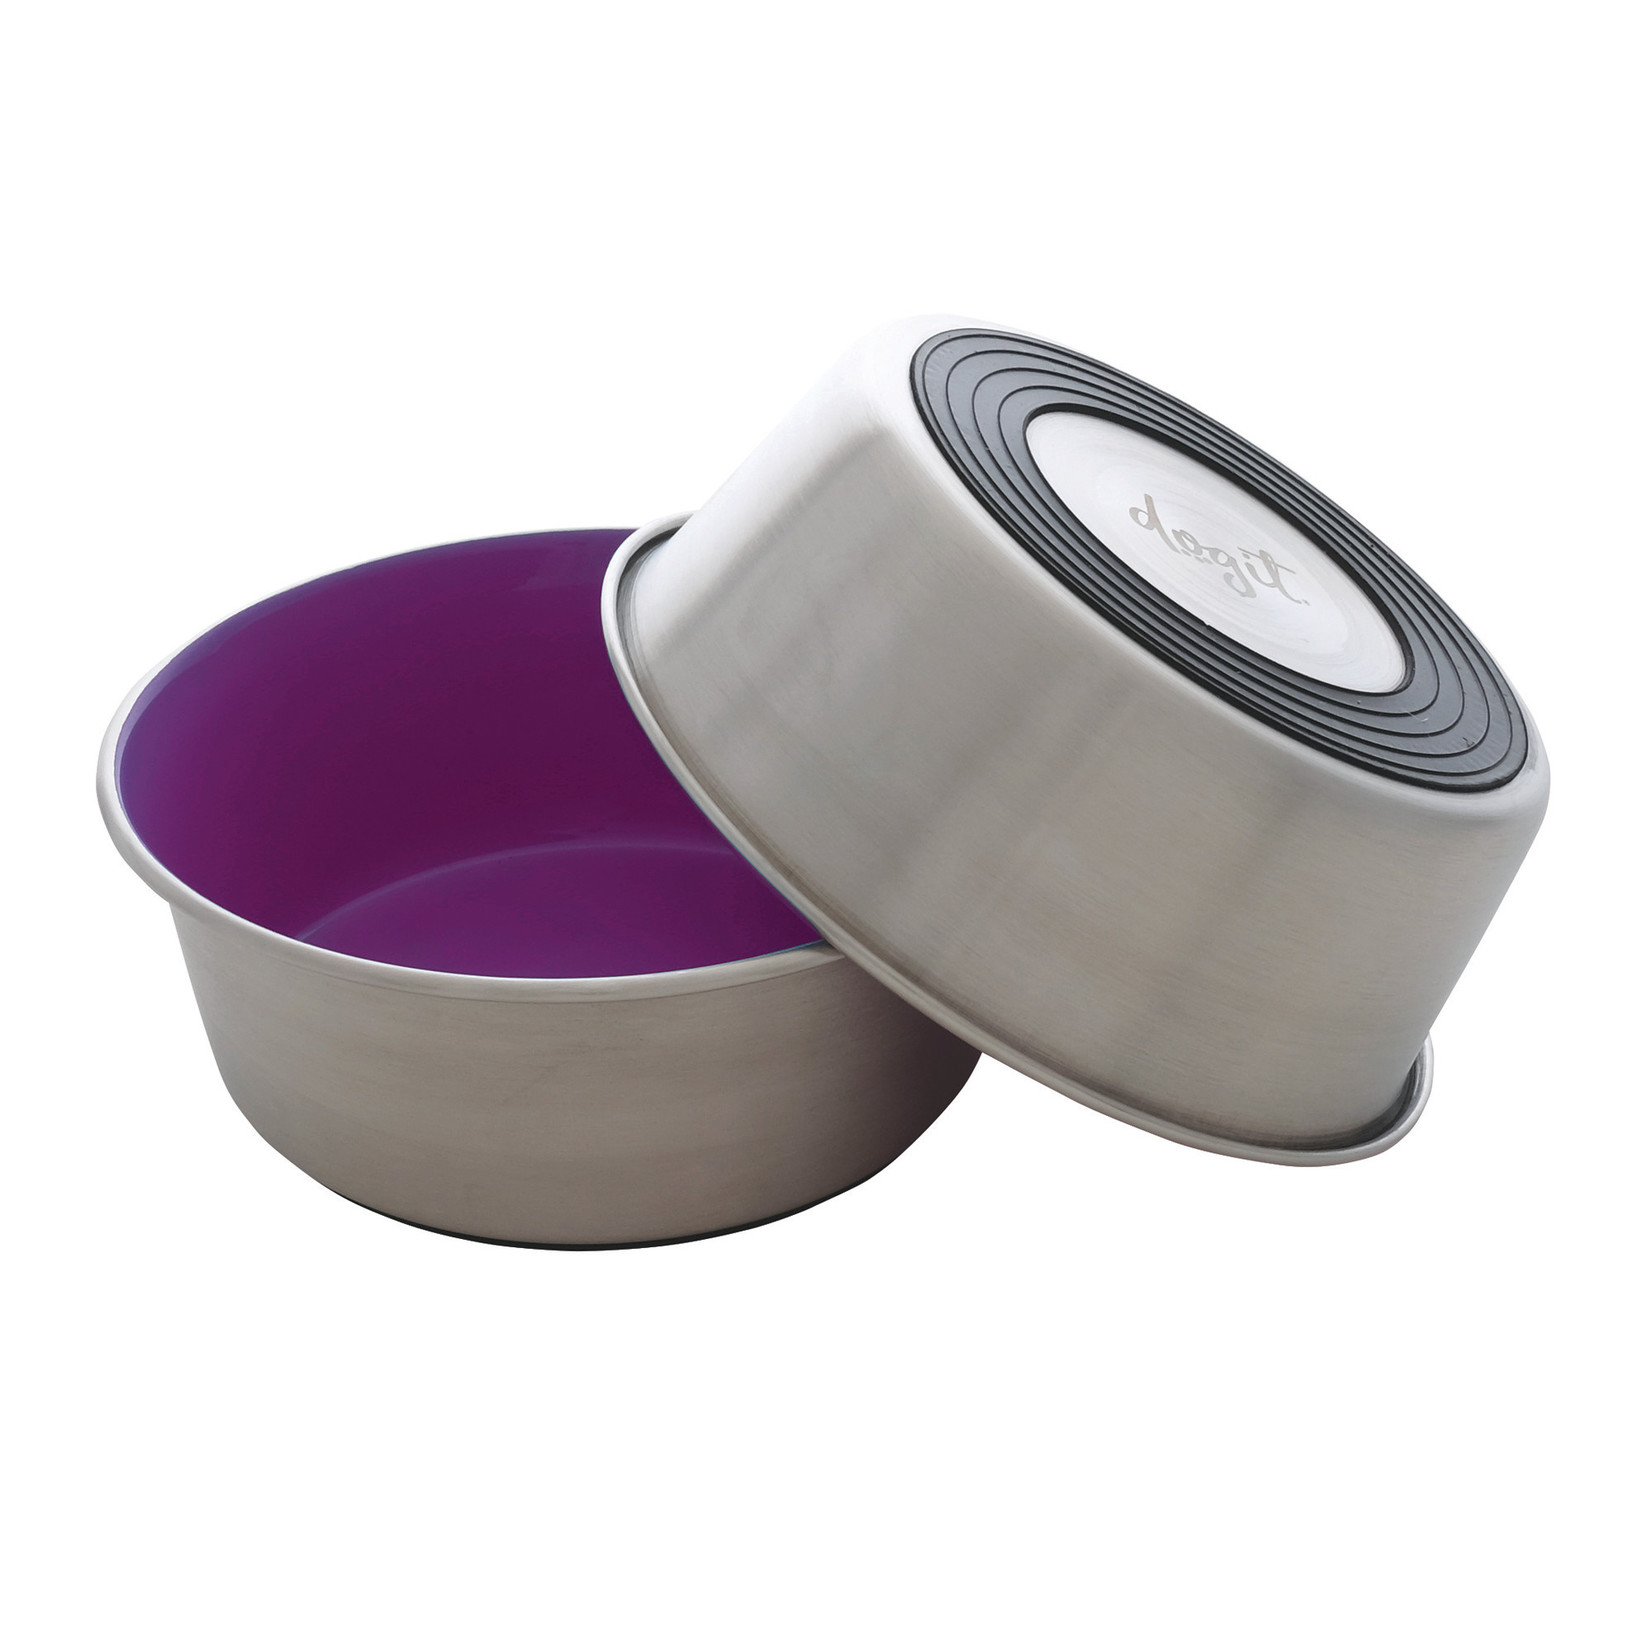 DogIt Dogit Stainless Steel Non-Skid Dog Bowl - Purple